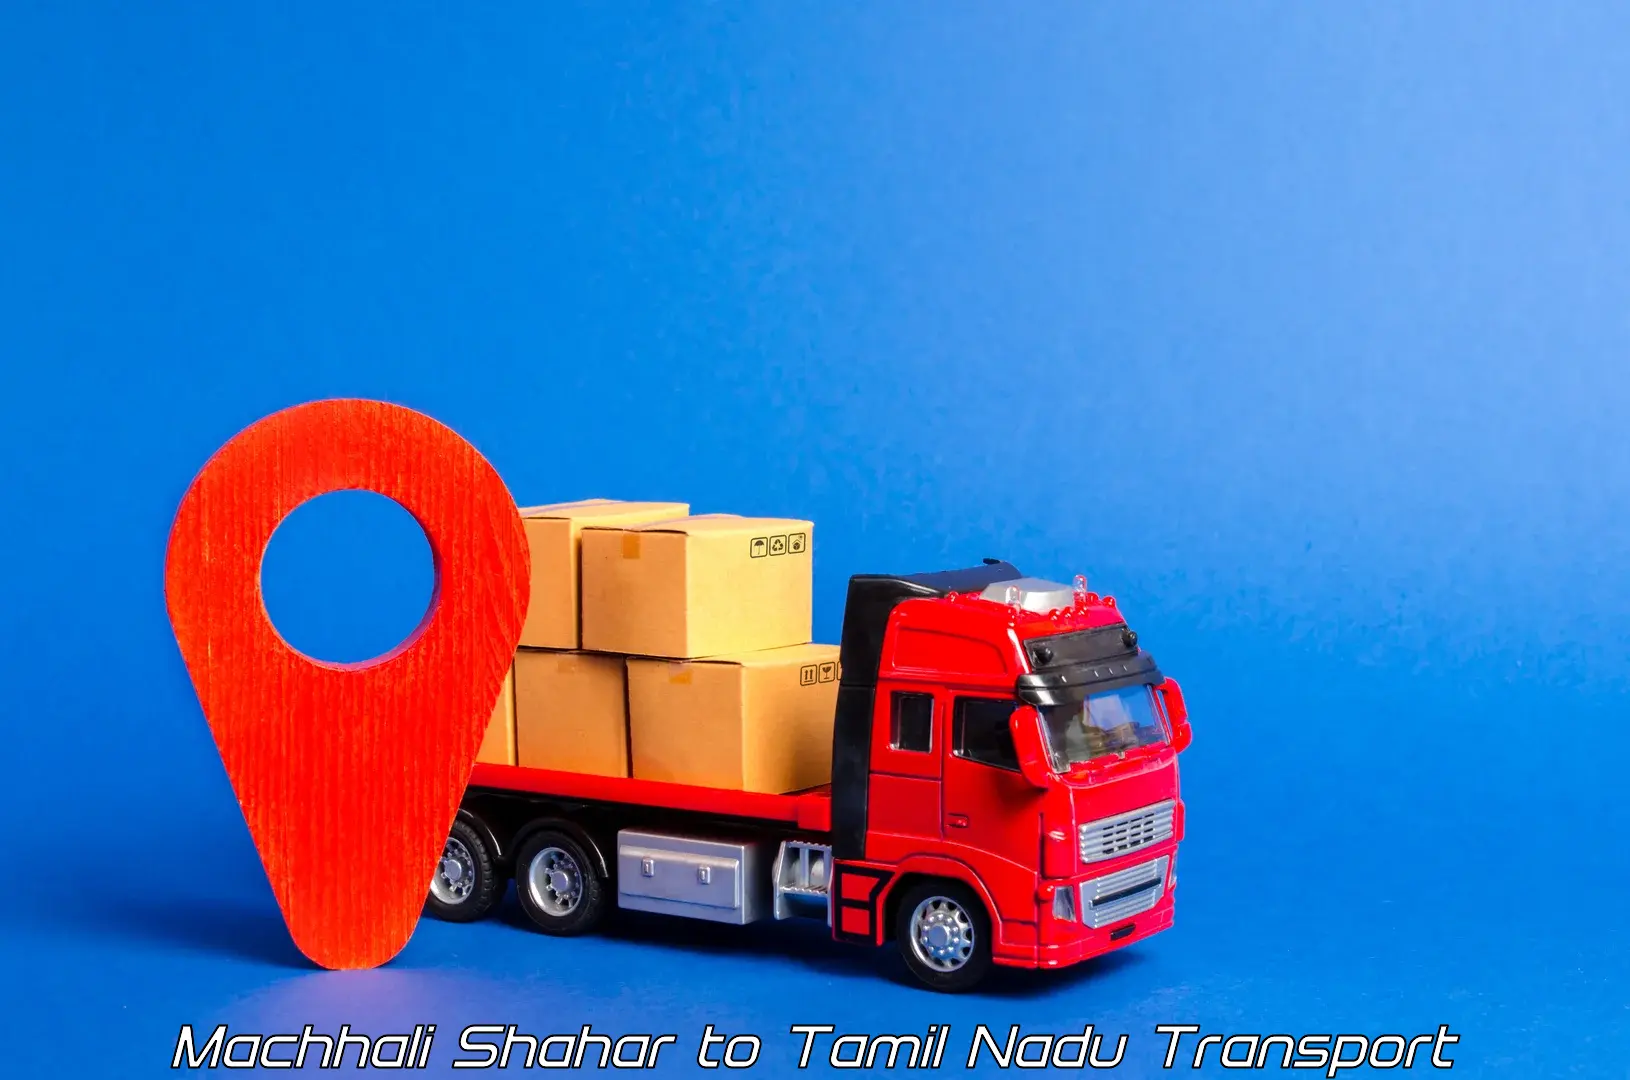 Goods transport services in Machhali Shahar to Palani